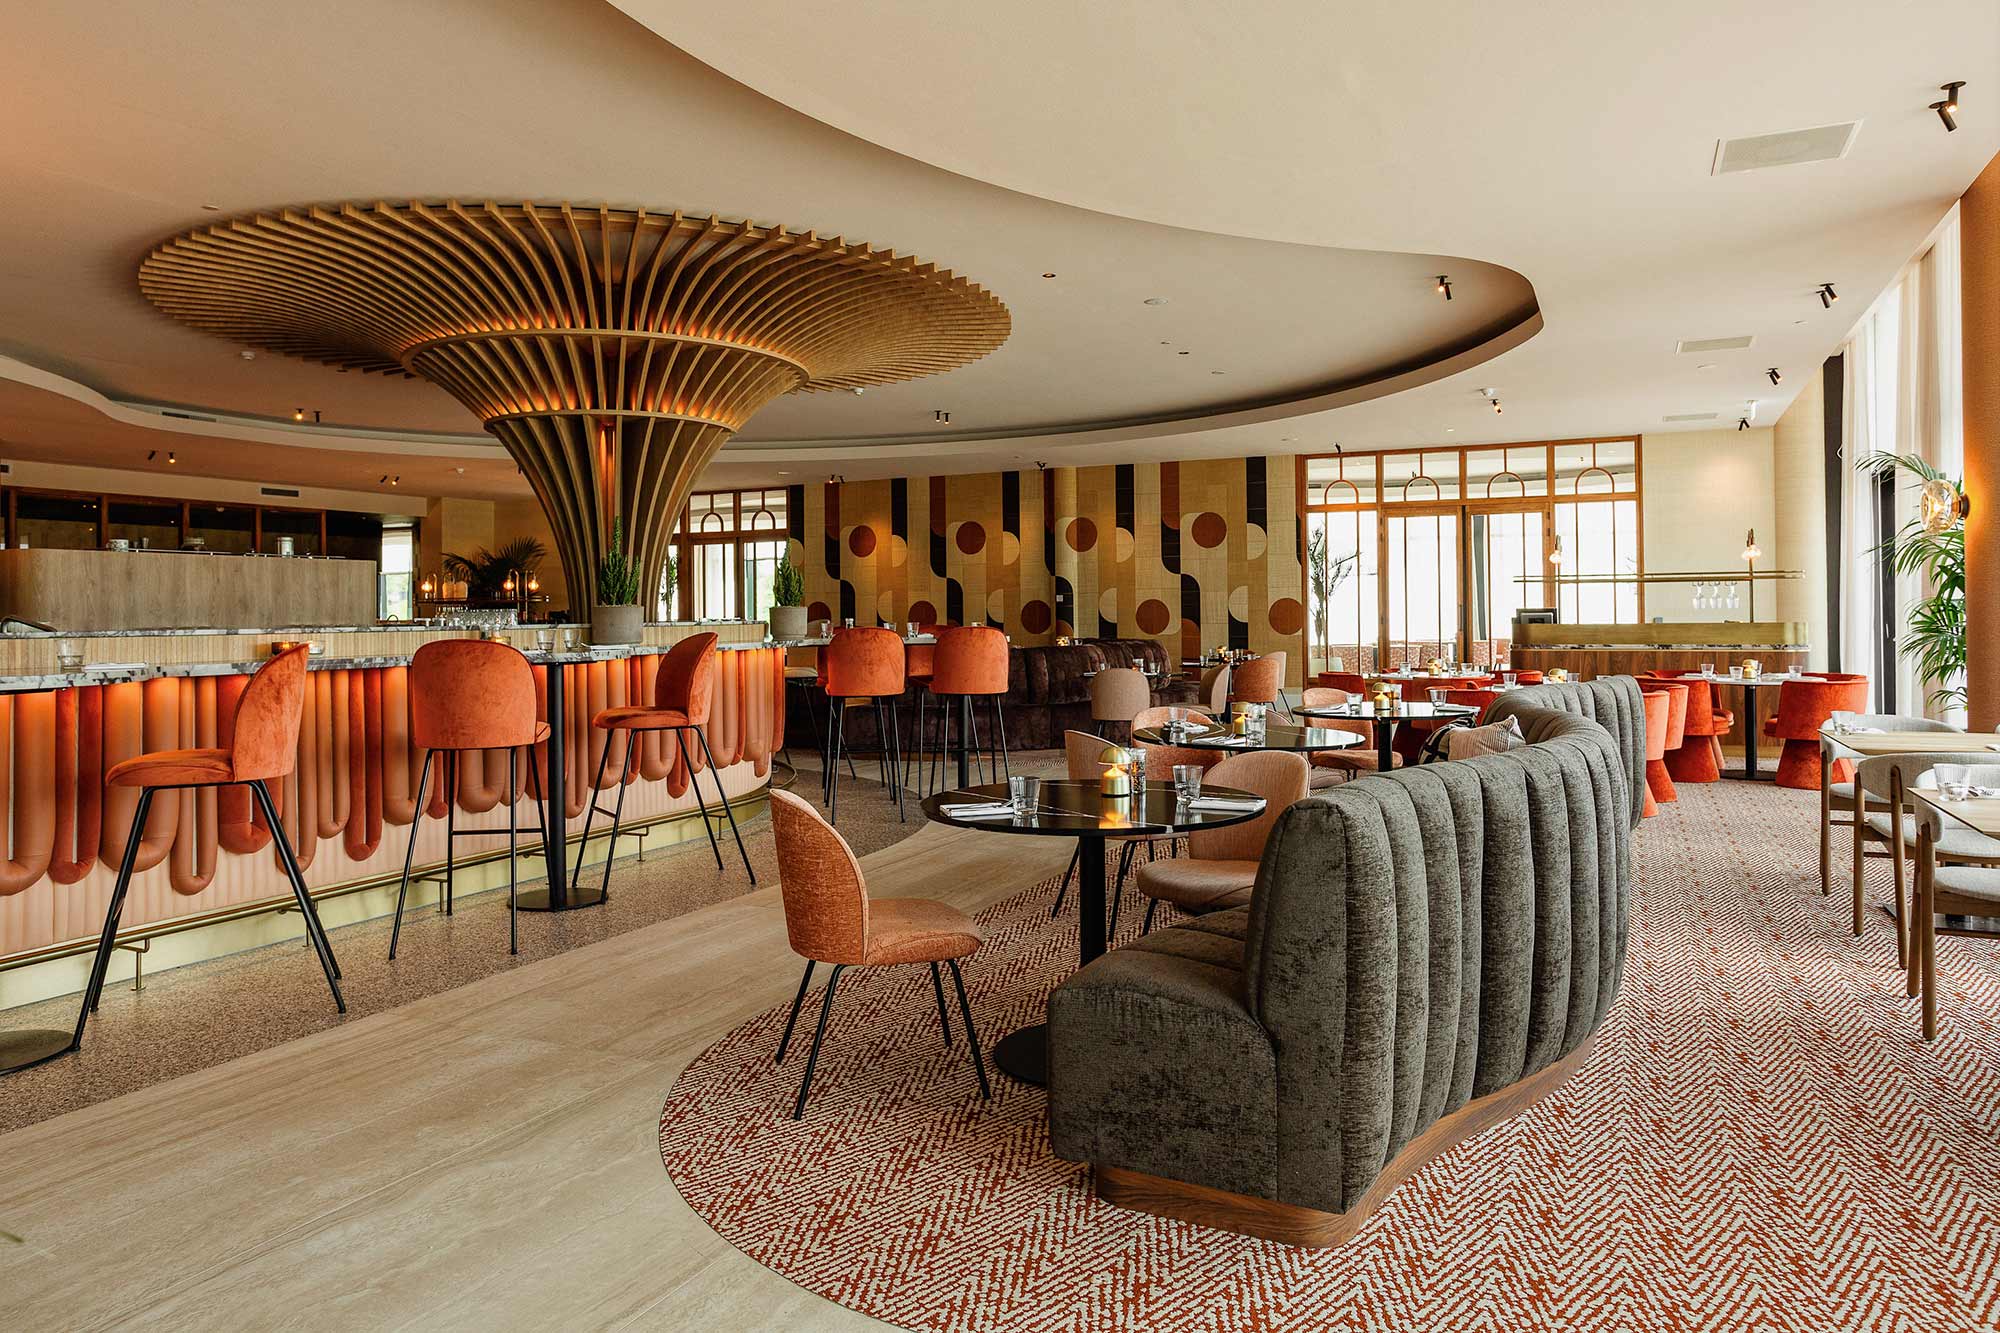 Image of VanderValkEindhoven 18 in The renovation of Grand Hôtel Français in Bordeaux gets a romantic, modern style using noble materials - Cosentino